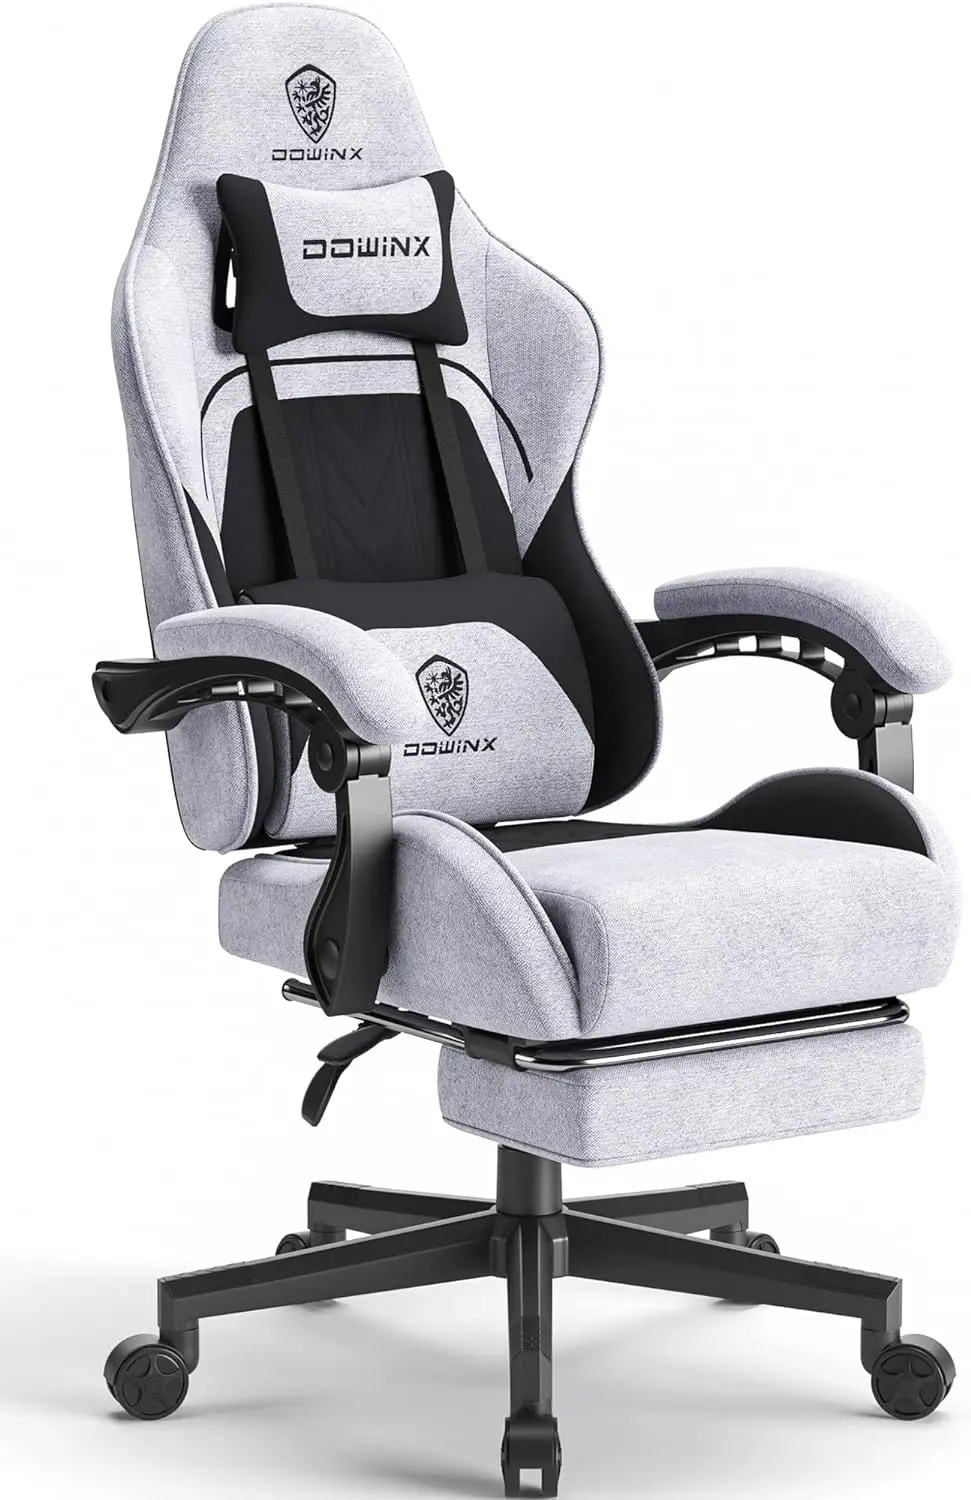 

Chair Fabric w/ Pocket Spring Cushion, Massage Game Chair Cloth w/ Headrest, Ergonomic Computer Chair with Footrest 290LBS